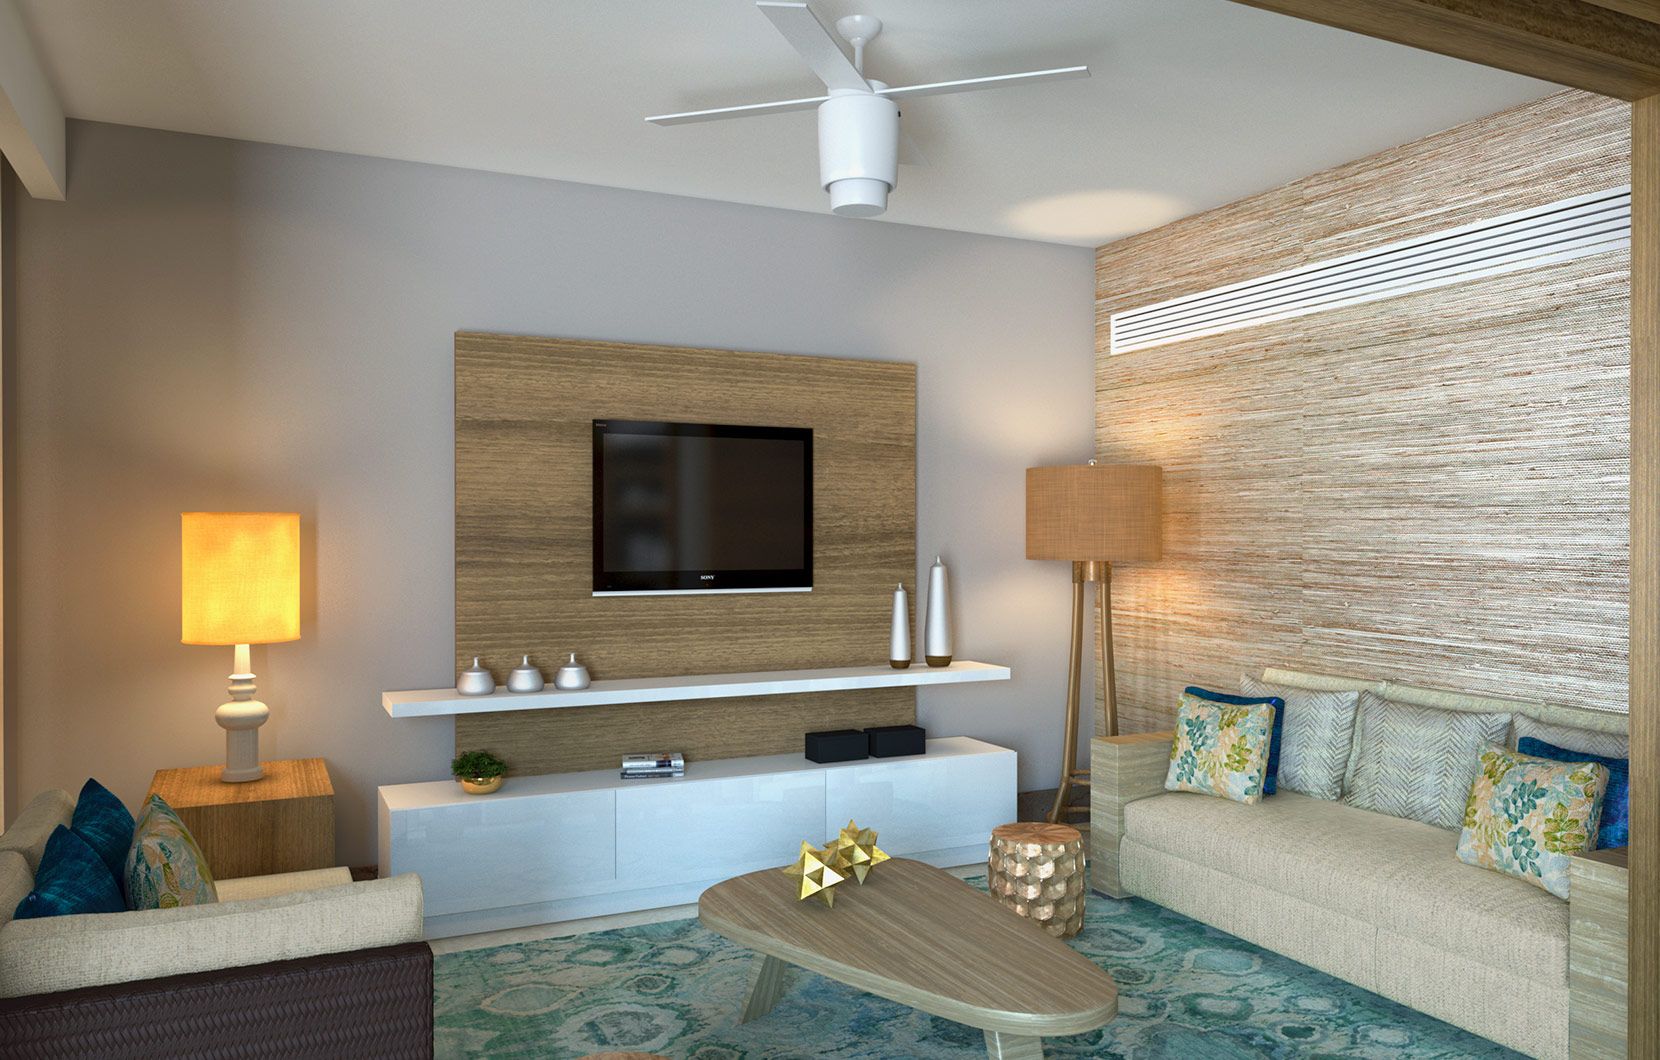 This new suite was designed with your family’s needs in mind..